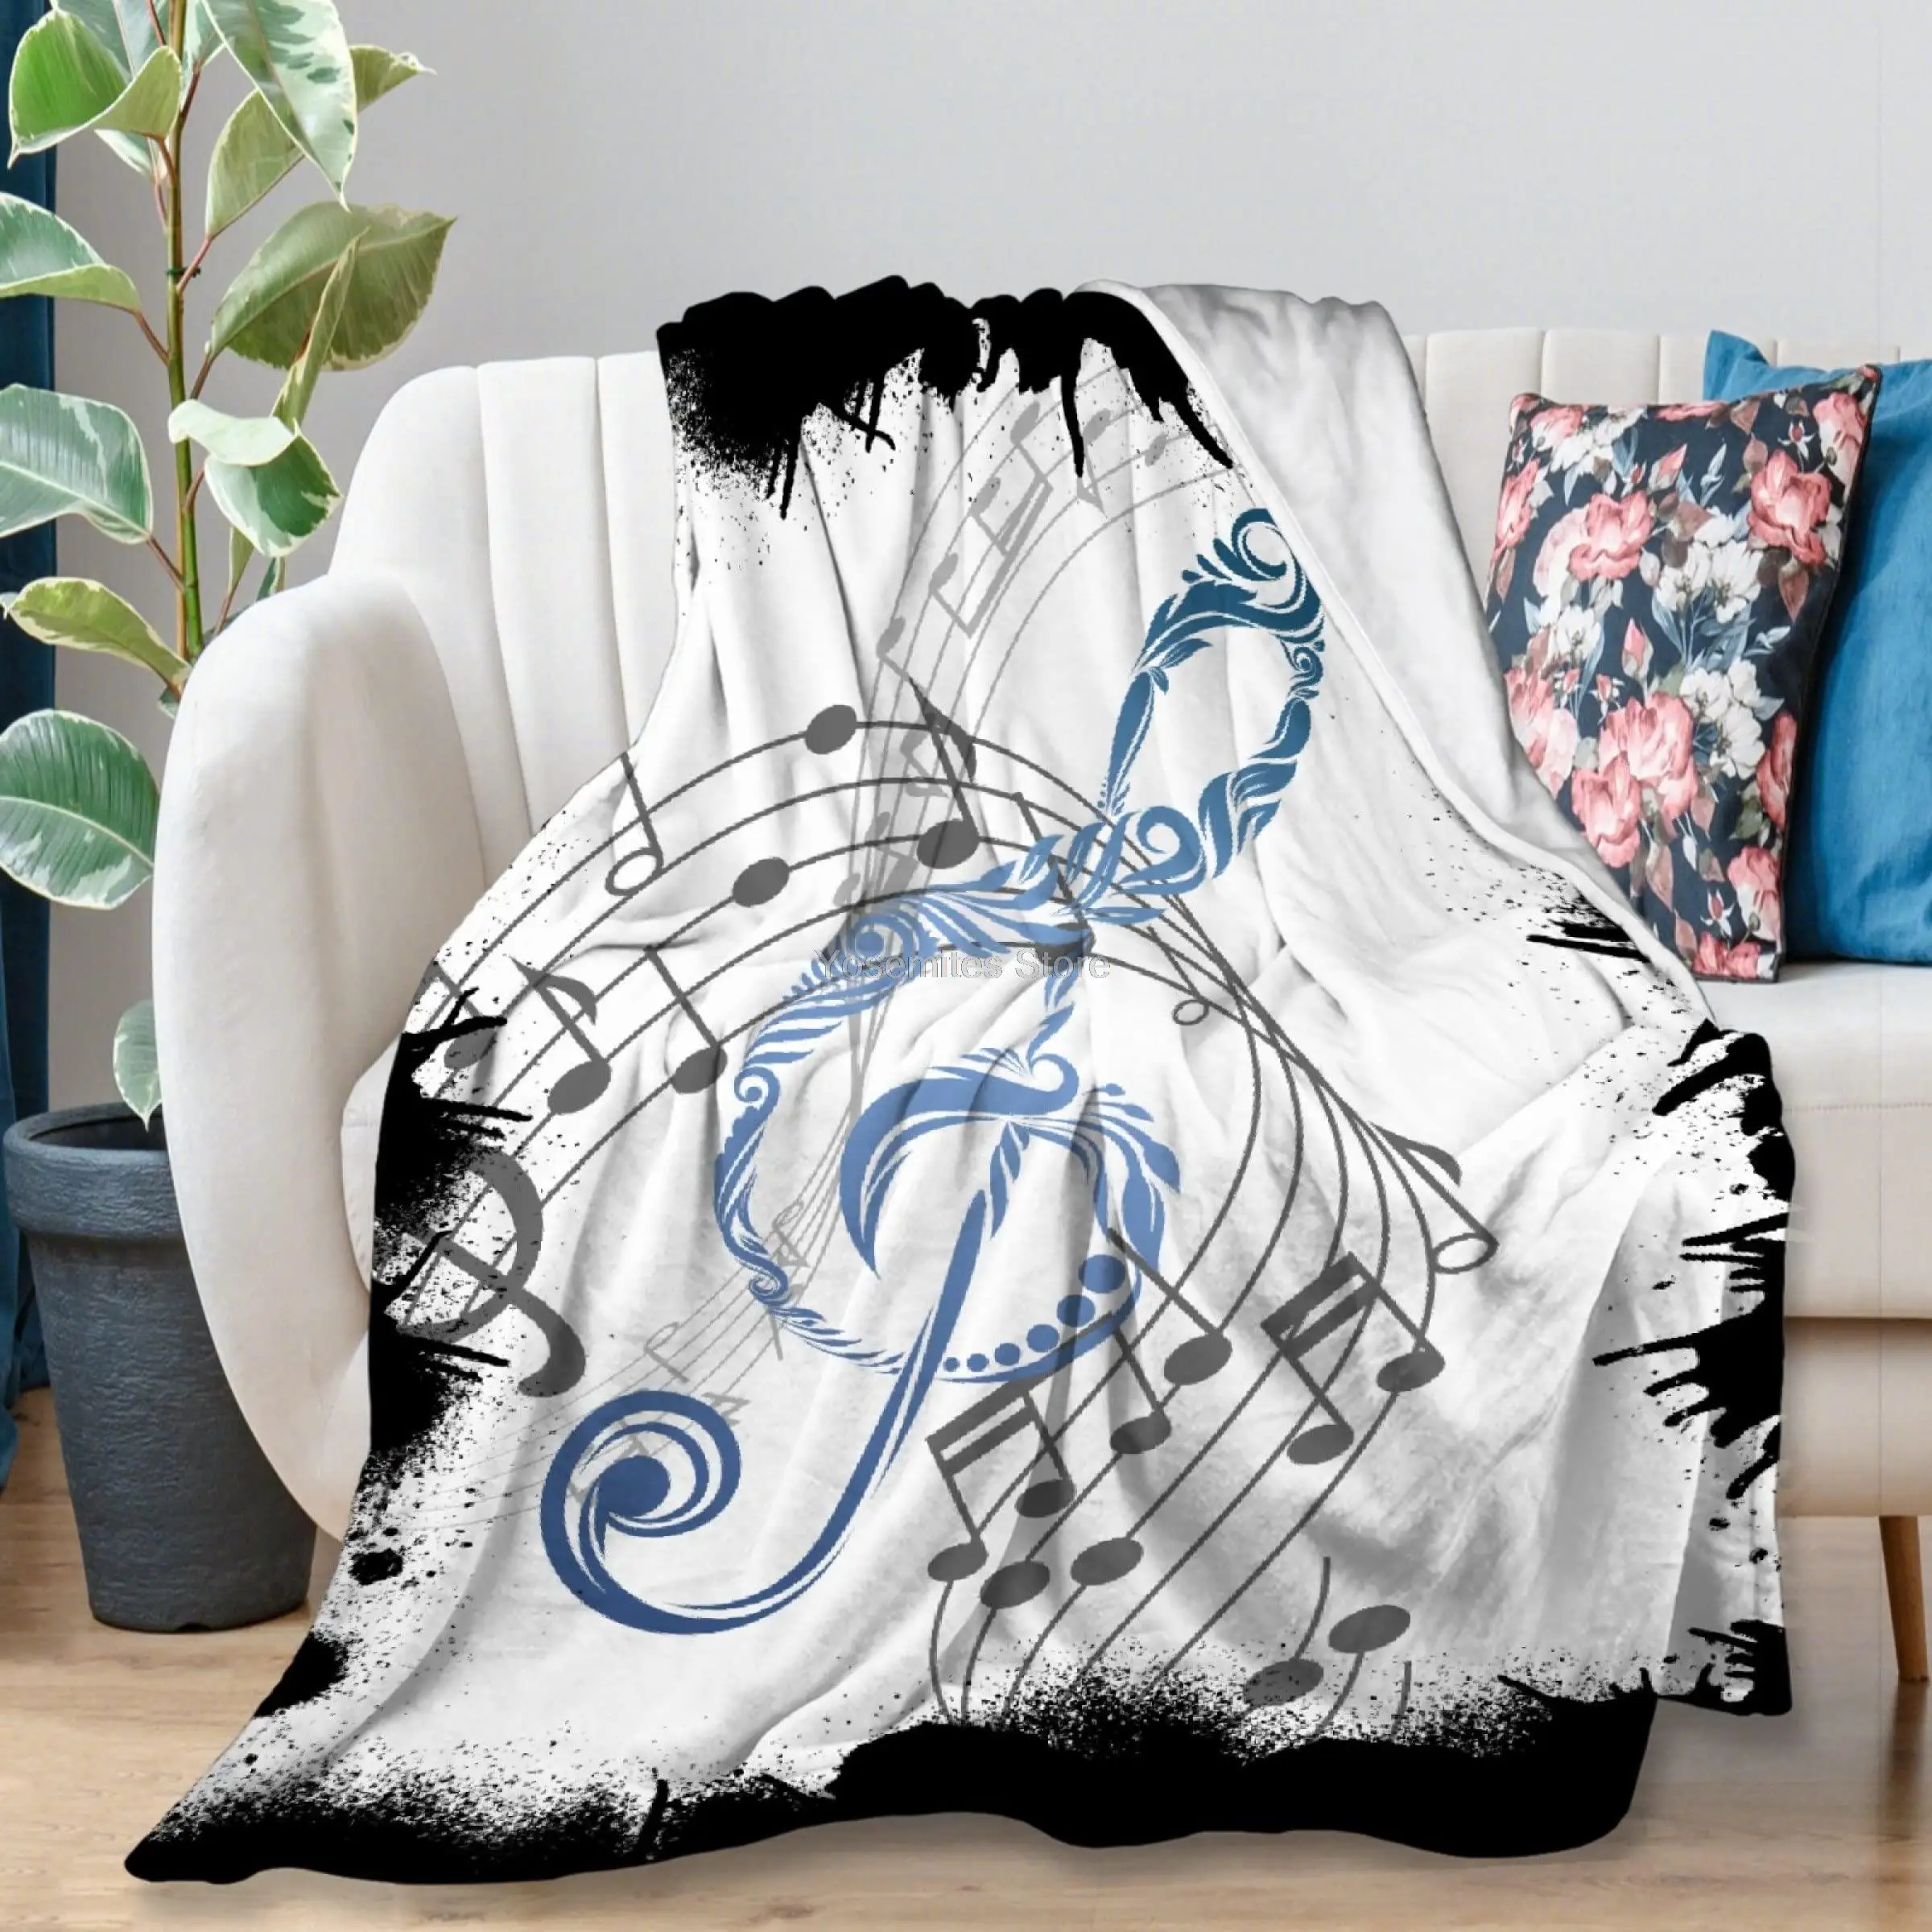 

Yaoola Music Note Flannel Blanket, All Season Soft Cozy Plush Bed Throw fit Bedroom Living Room Sofa Couch Bedding Office Cinema